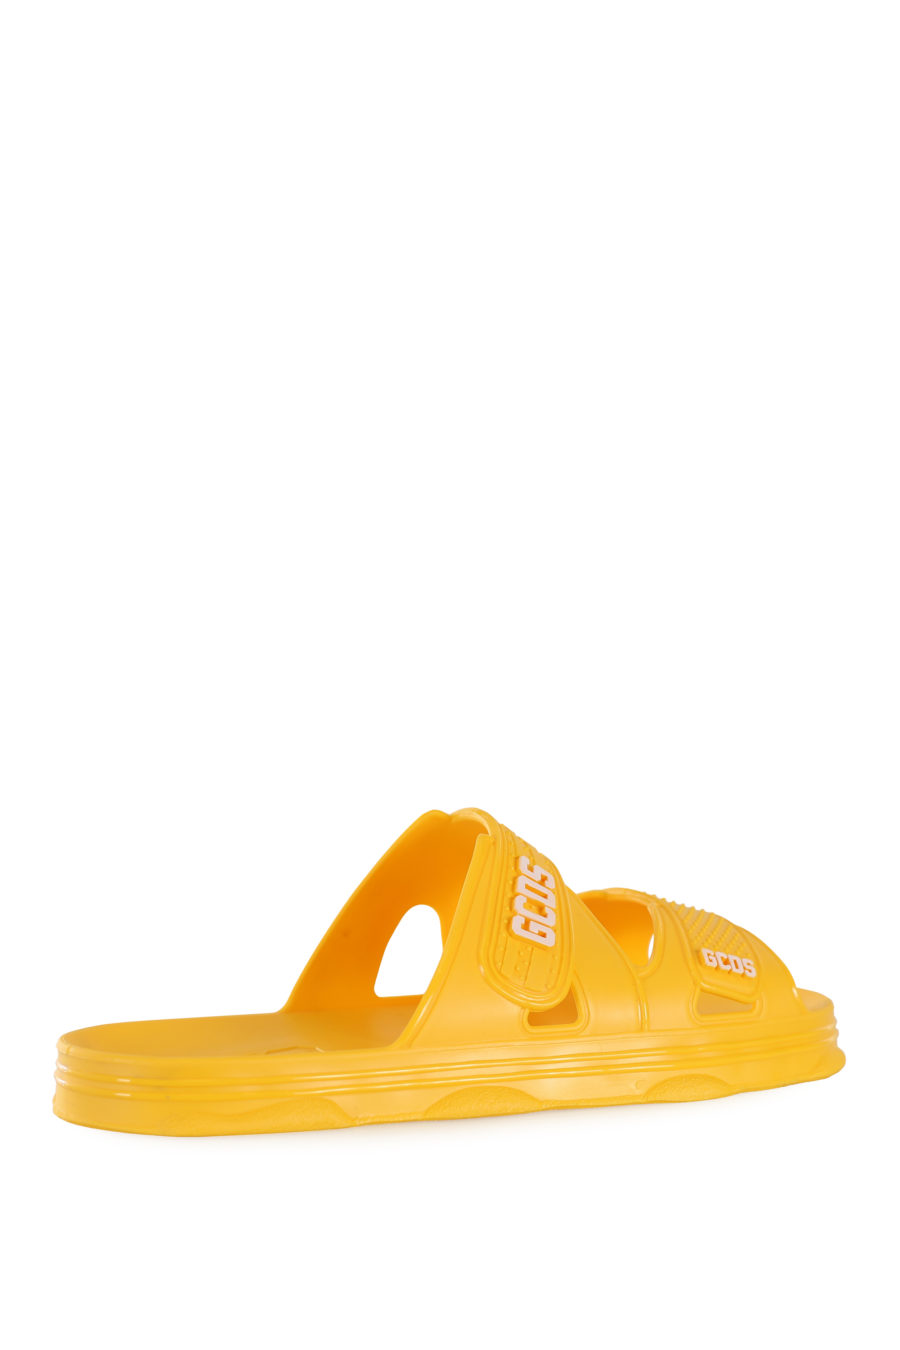 Yellow rubber flip flops with white logo - IMG 1685